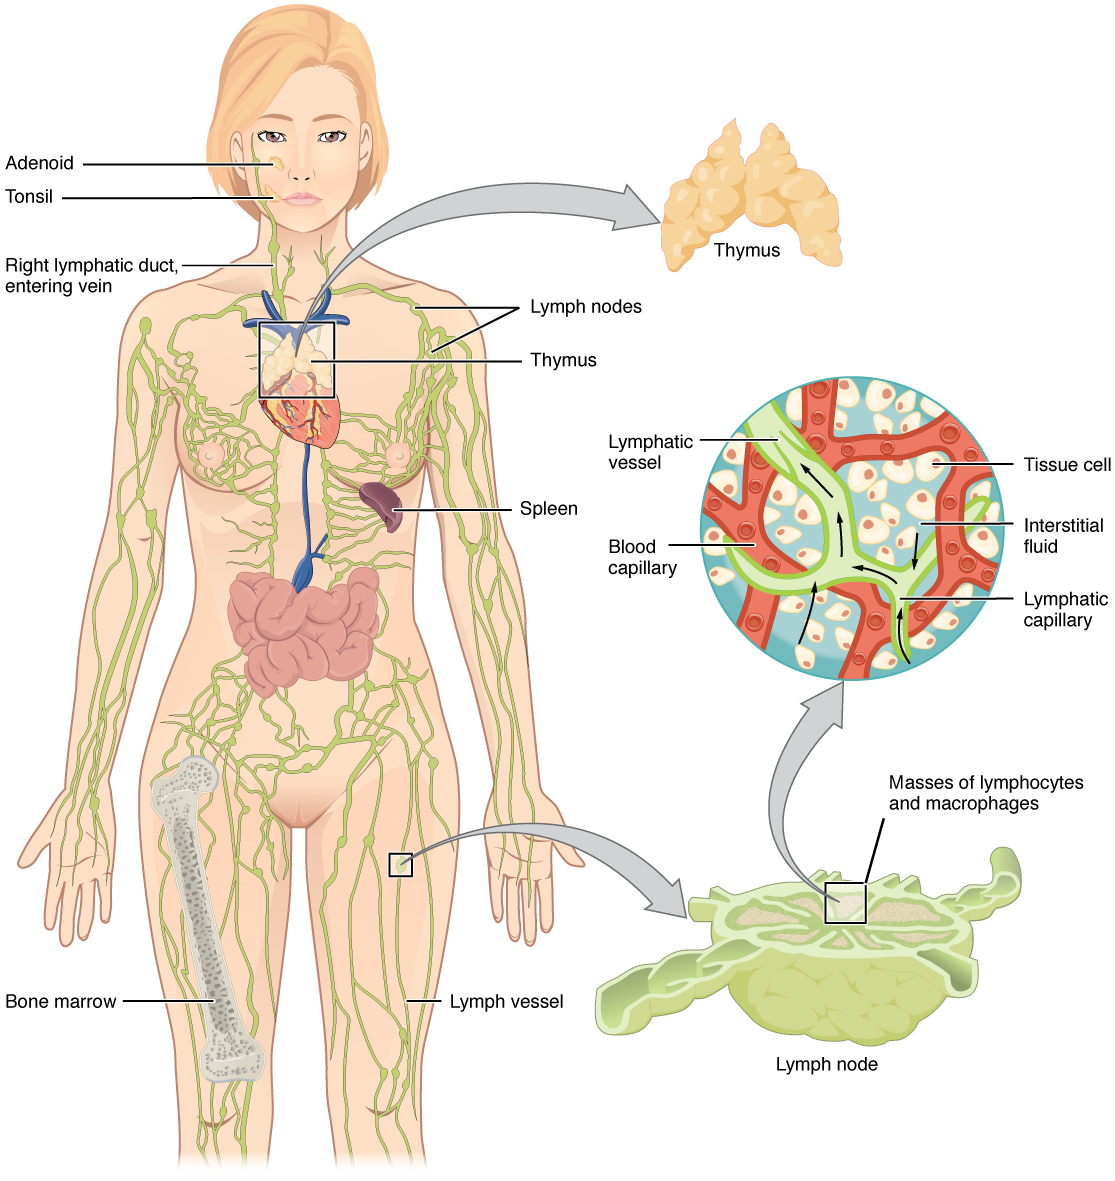 Anatomy of the lymphatic system including lymph node and thymus.